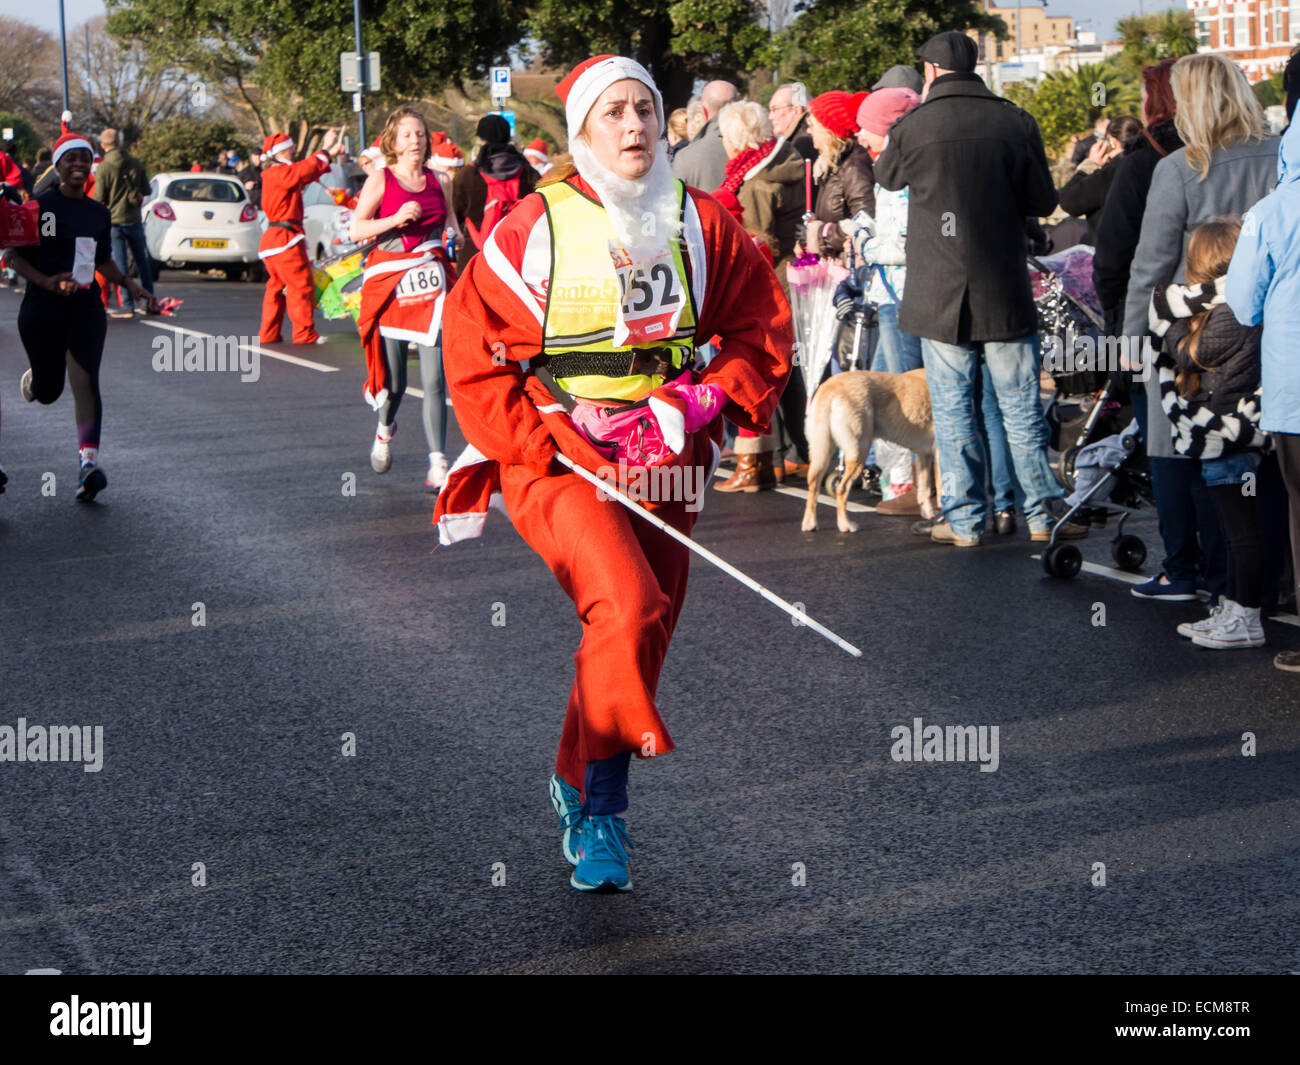 A partially sighted runner dressed as Santa Clause takes part in the Santa fun run in Portsmouth, England Stock Photo